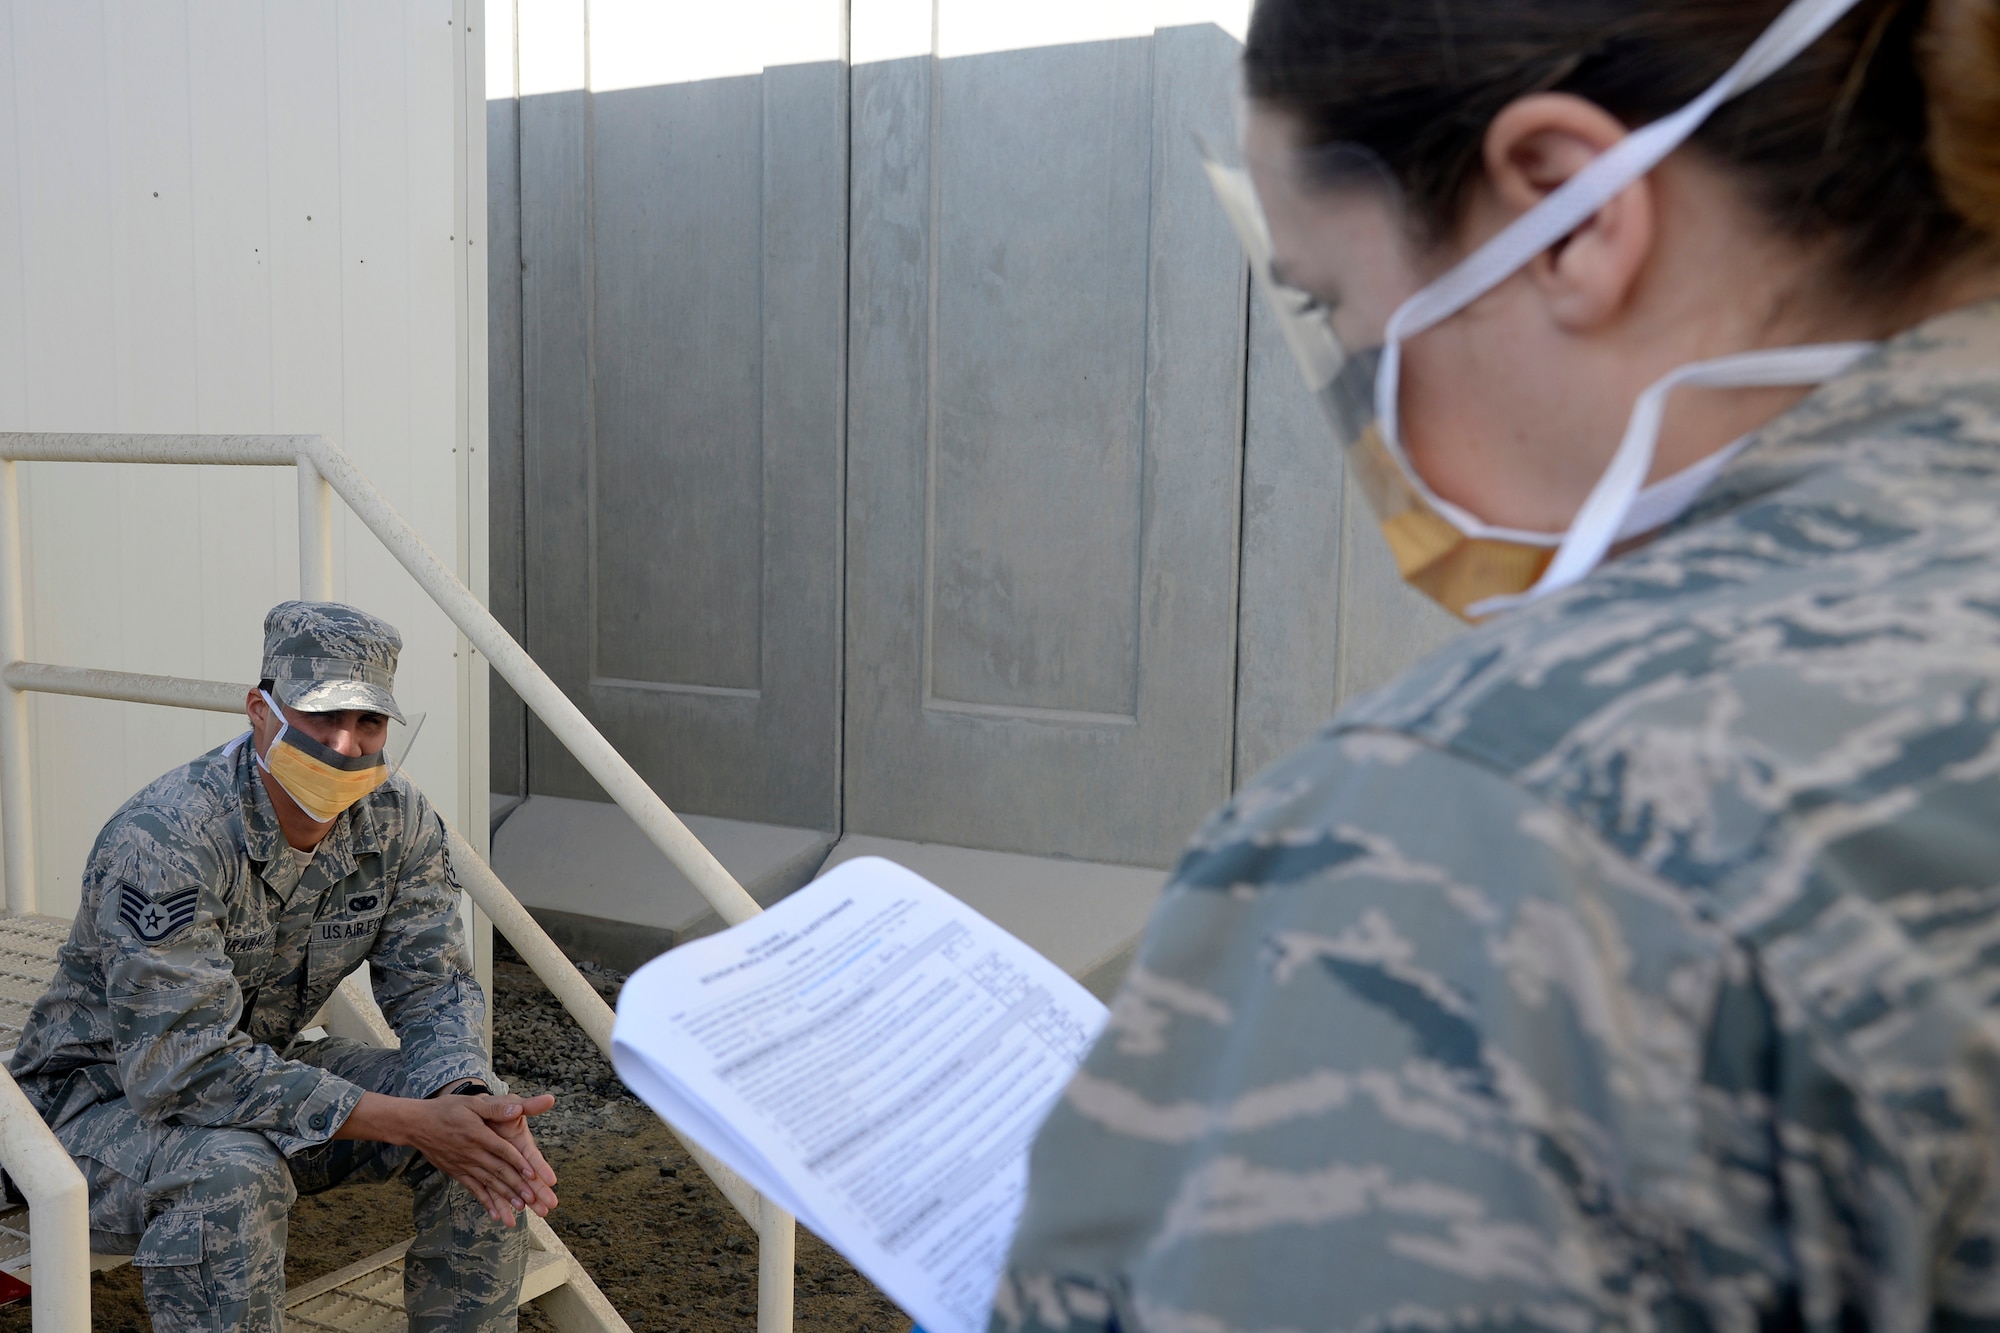 Staff Sgt. Hannah, medical technician, reviews a medical questionnaire with a possible Ebola patient during a training exercise at an undisclosed location in Southwest Asia Jan. 15, 2015. The exercise tested the Air Expeditionary Wing’s Disease Containment Plan. Hannah is currently deployed from Joint Base Langley-Eustis, Va., and is a native of Lake Forest, Calif. (U.S. Air Force photo/Tech. Sgt. Marie Brown)